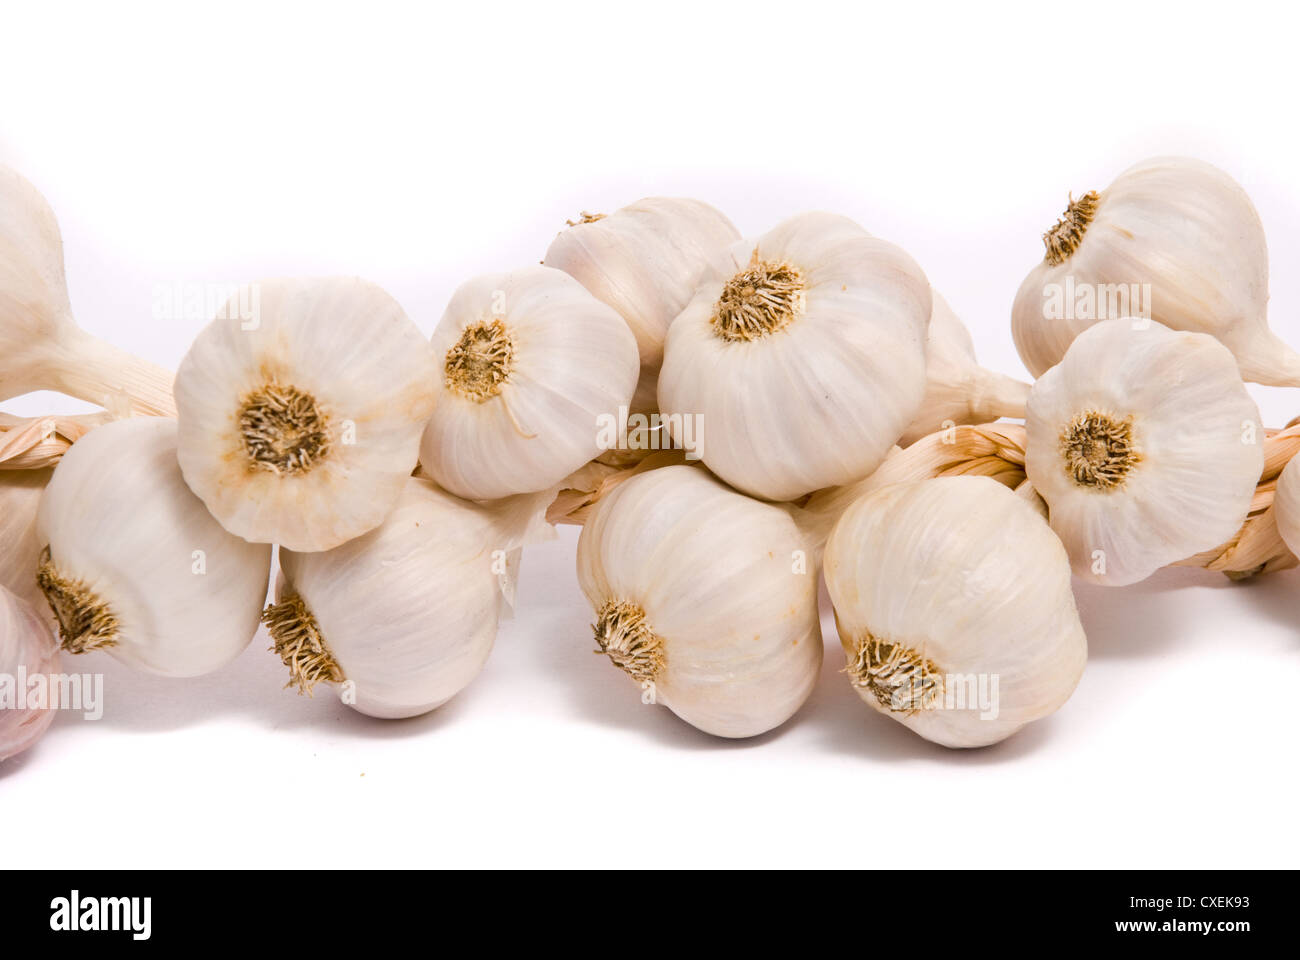 Garlic on white with soft shadow Stock Photo